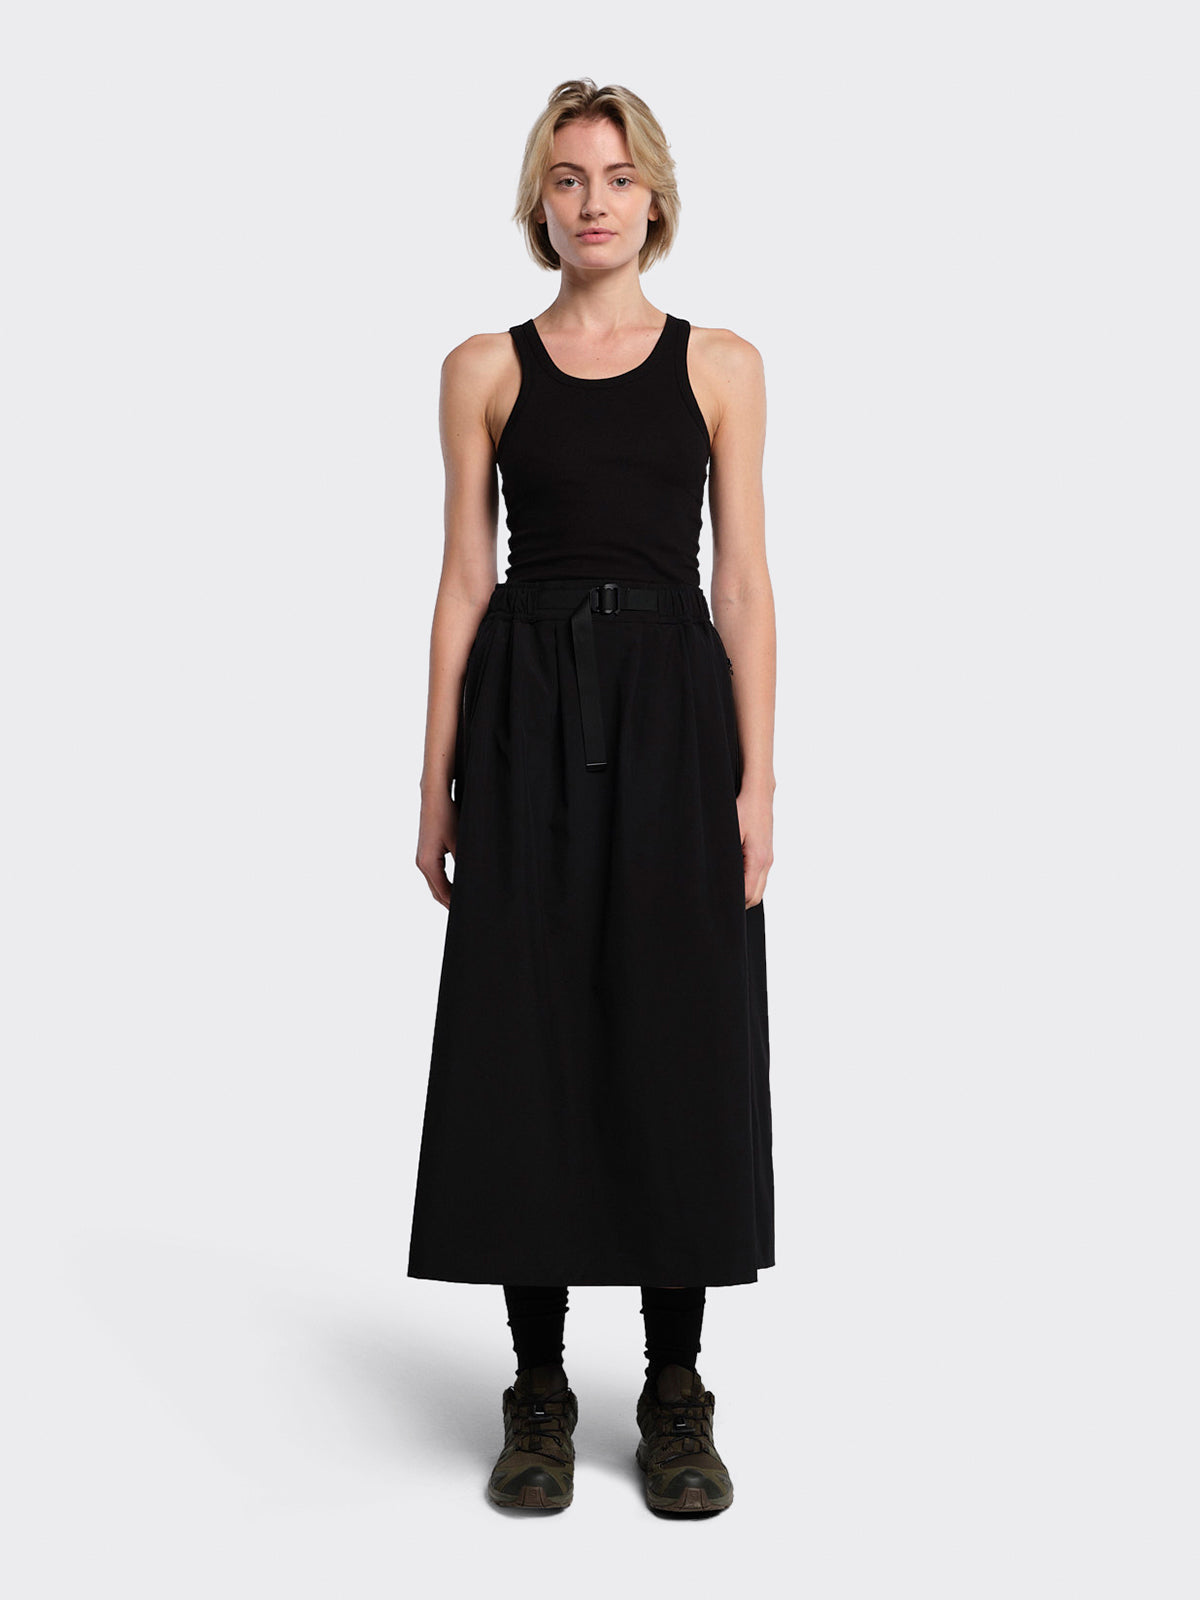 Woman wearing Hildre skirt from Blæst in Black